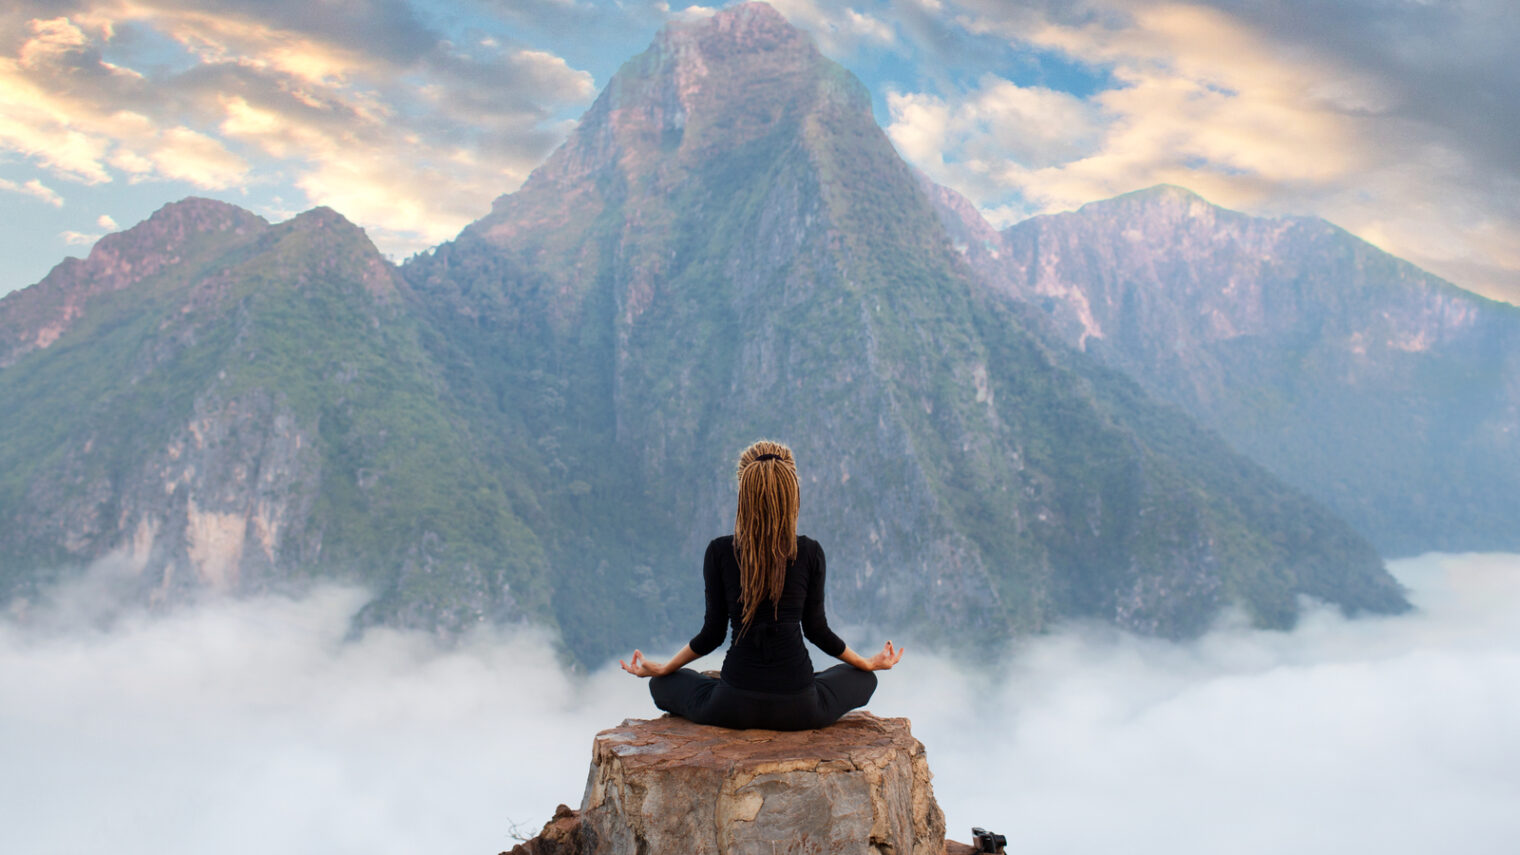 Find your way to calm. Photo by Shutterstock